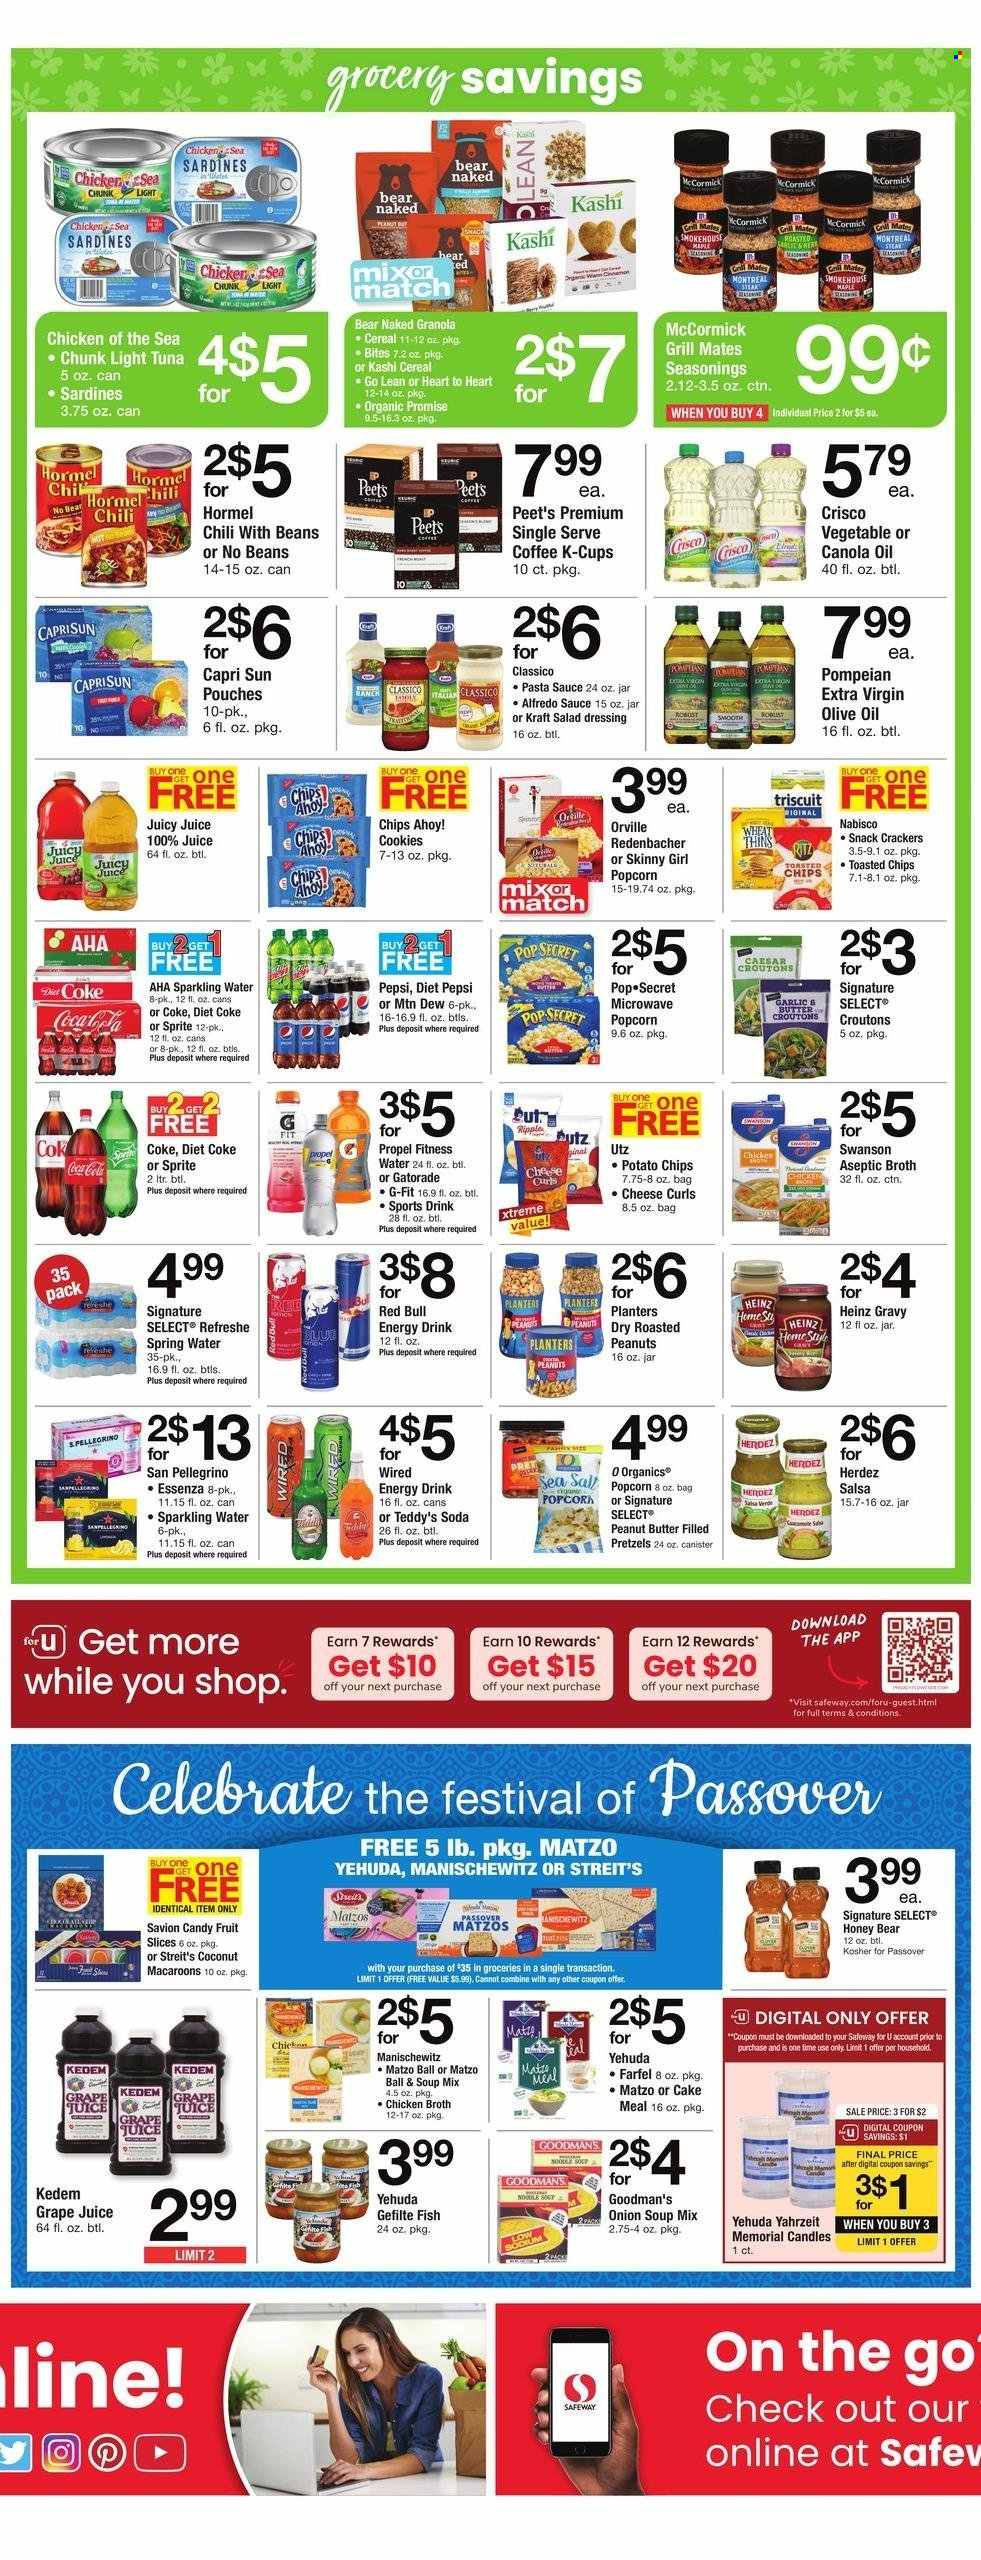 thumbnail - Safeway Flyer - 03/24/2023 - 03/30/2023 - Sales products - pretzels, cake, sardines, tuna, fish, pasta sauce, onion soup, soup mix, soup, sauce, Alfredo sauce, Kraft®, Hormel, cookies, snack, crackers, Savion, Chips Ahoy!, fruit slices, RITZ, potato chips, chips, Thins, popcorn, Crisco, croutons, chicken broth, broth, Heinz, light tuna, Chicken of the Sea, cereals, granola, salad dressing, dressing, salsa, Classico, canola oil, extra virgin olive oil, olive oil, oil, honey, peanut butter, roasted peanuts, peanuts, Planters, Capri Sun, Coca-Cola, Mountain Dew, Sprite, Pepsi, juice, energy drink, Diet Pepsi, Diet Coke, Red Bull, Kedem, Gatorade, Coke, spring water, soda, sparkling water, San Pellegrino, water, coffee, coffee capsules, K-Cups, candle, grill. Page 2.